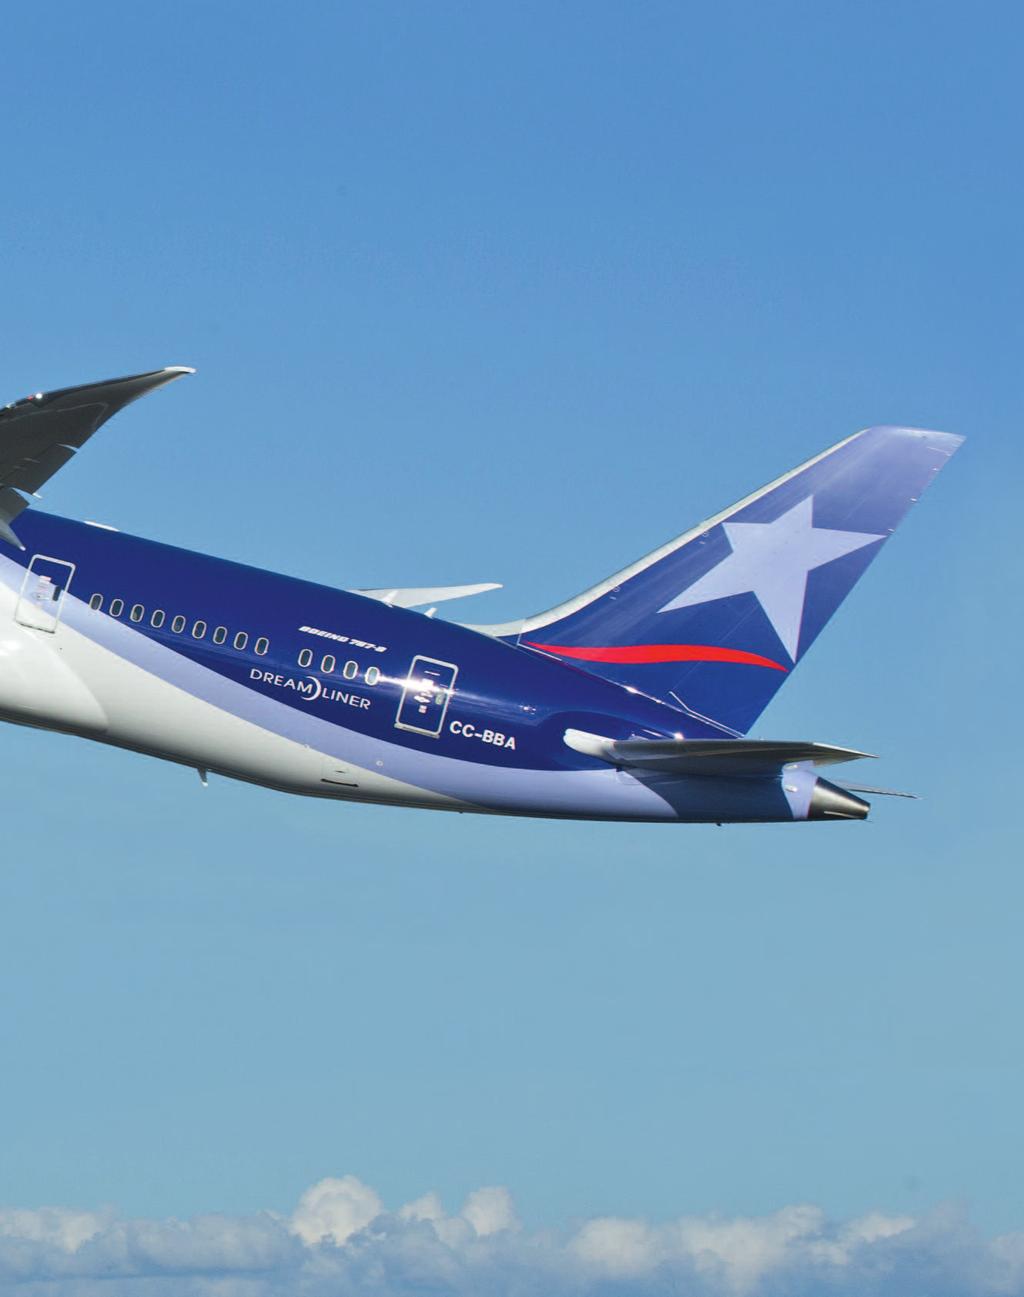 AVIATION LATAM creating a common culture Chile s LAN Airlines has merged with Brazil s TAM, joining the Pacific with the Atlantic and creating a major airline force in South America.